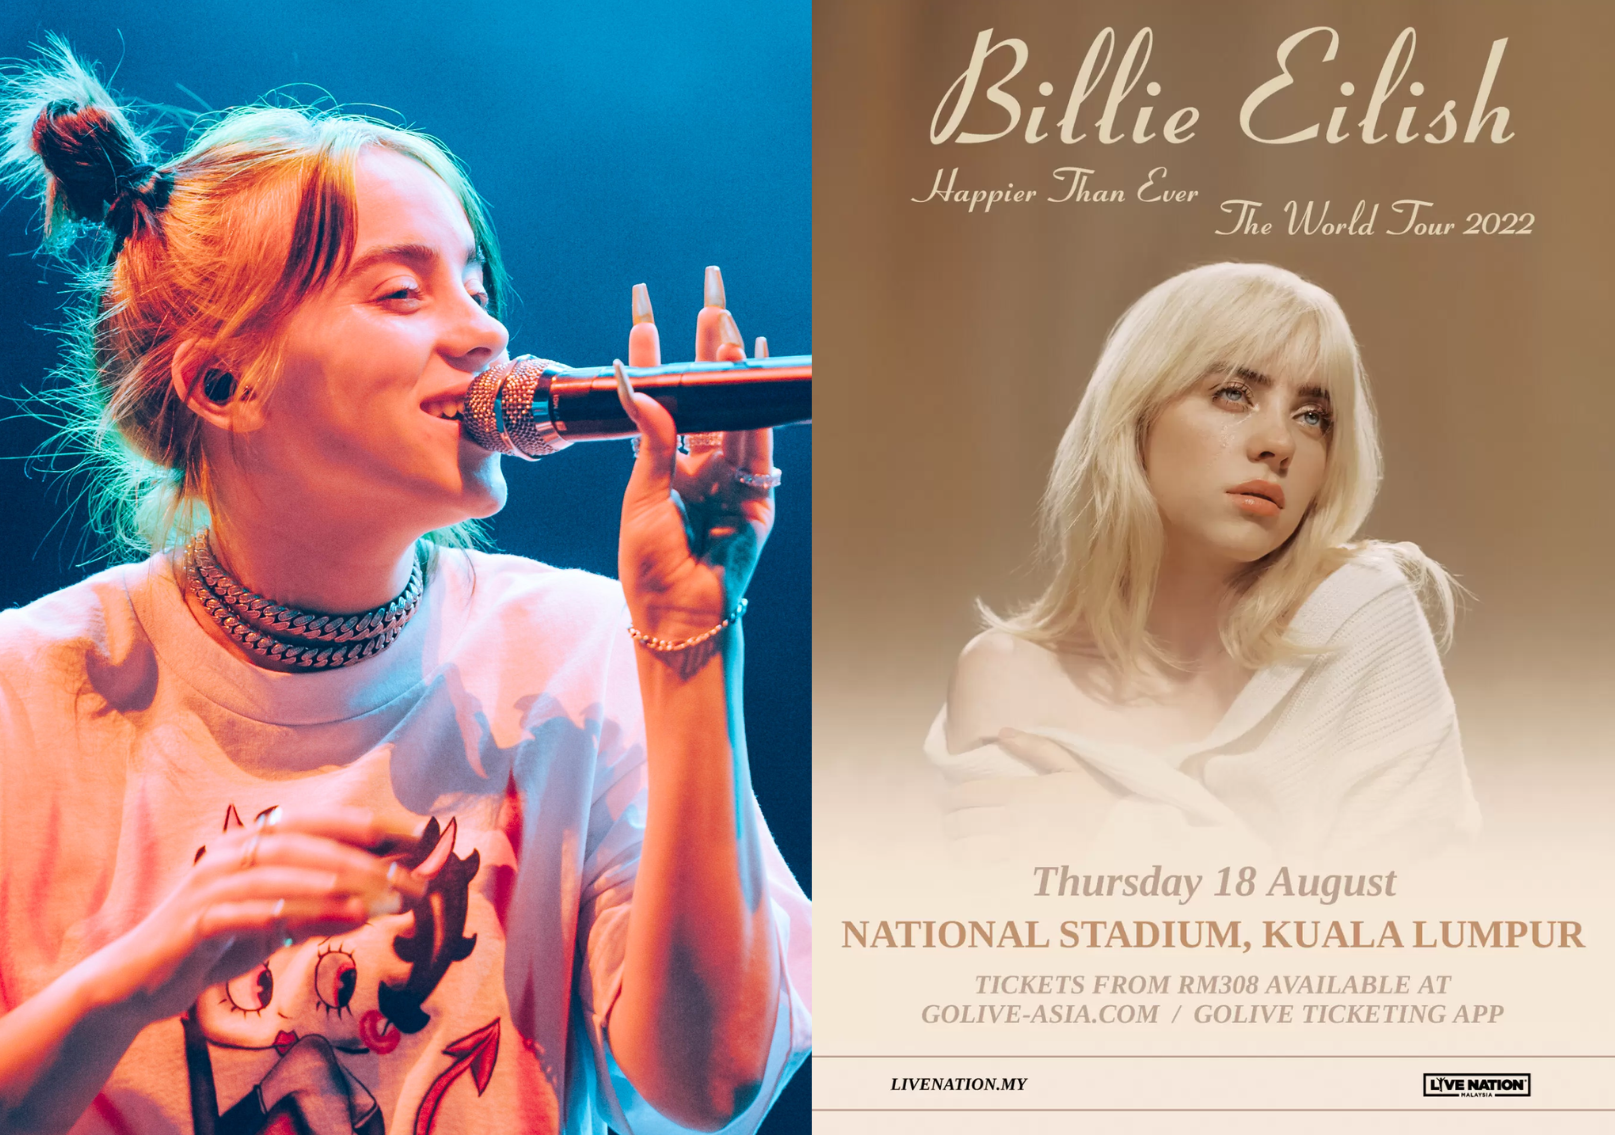 Get Ready As Billie Eilish Is Coming To Kuala Lumpur This August!